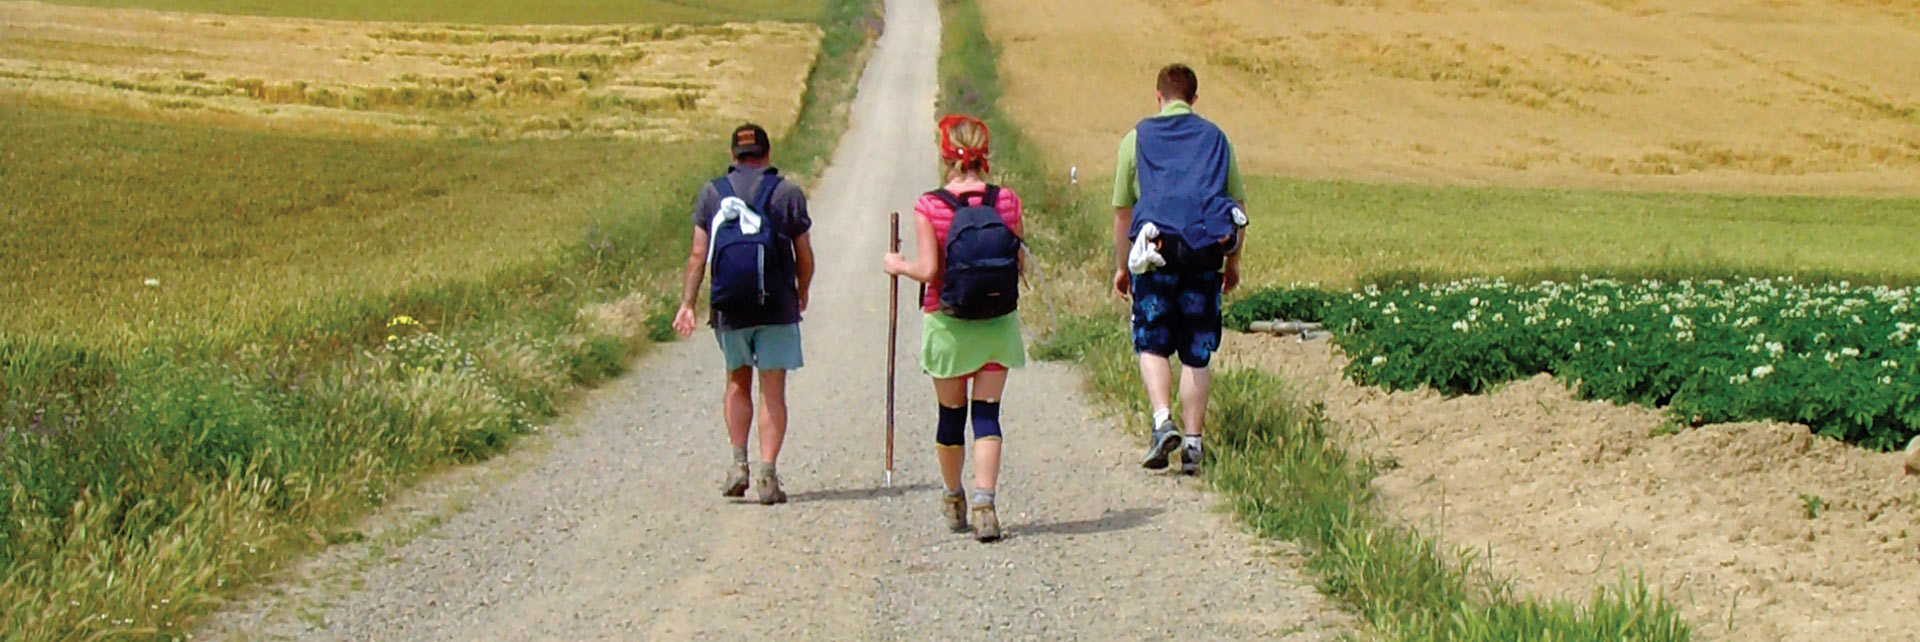 Walkers in the countryside